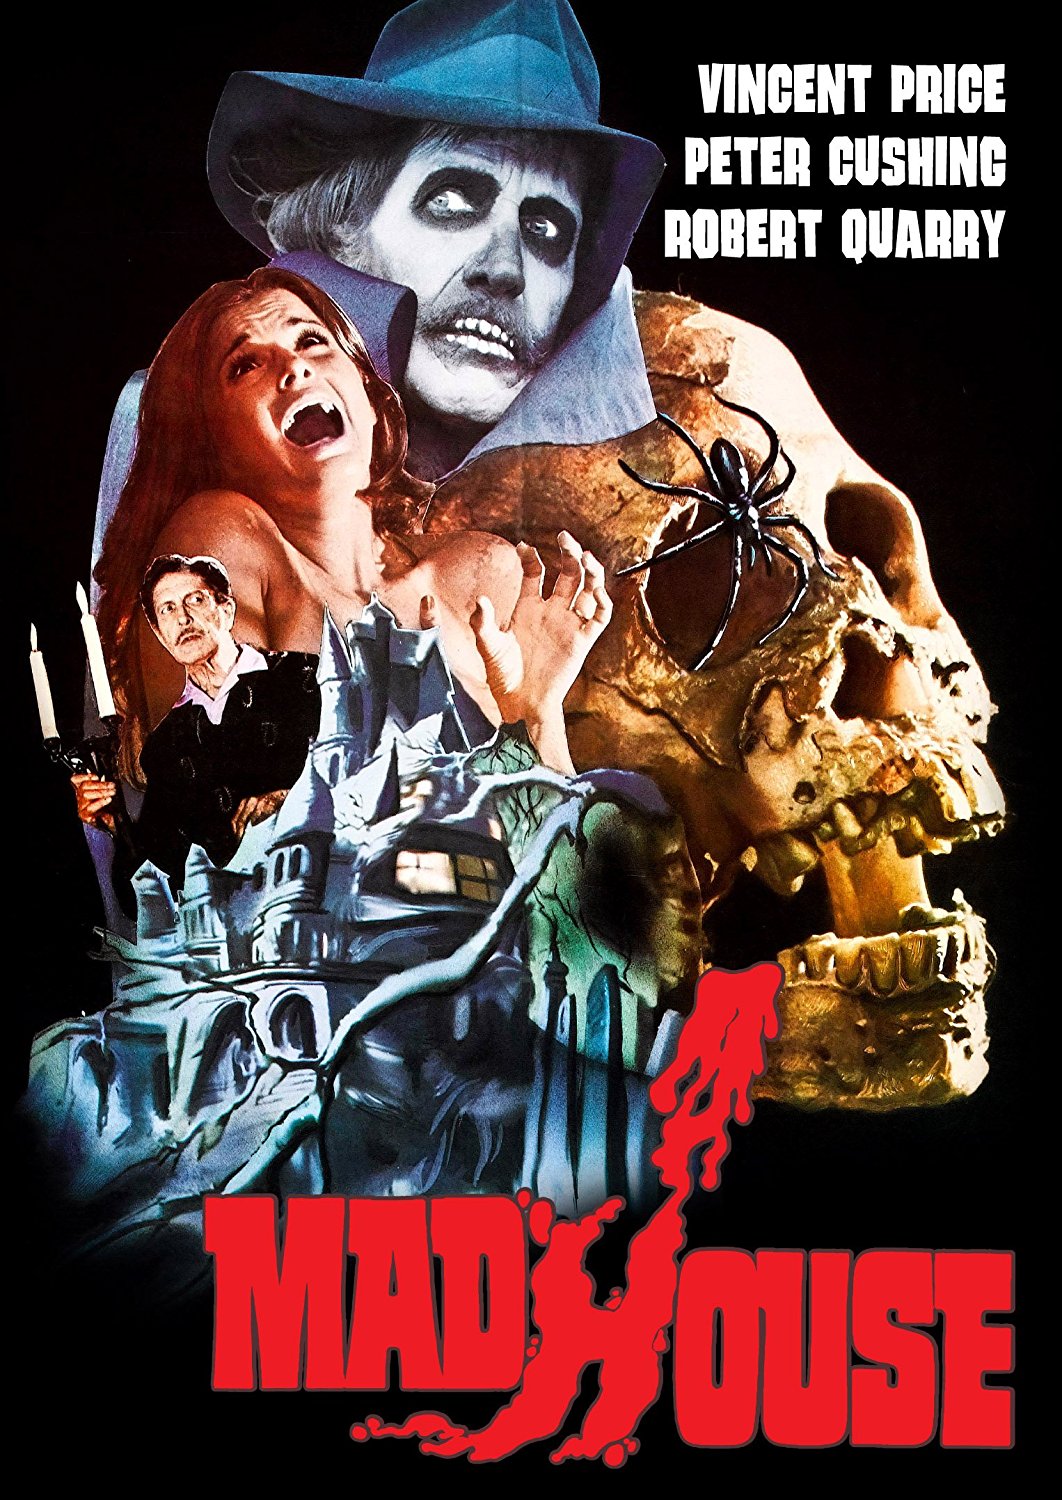 Madhouse (1974) starring Vincent Price, Peter Cushing, Robert Quarry